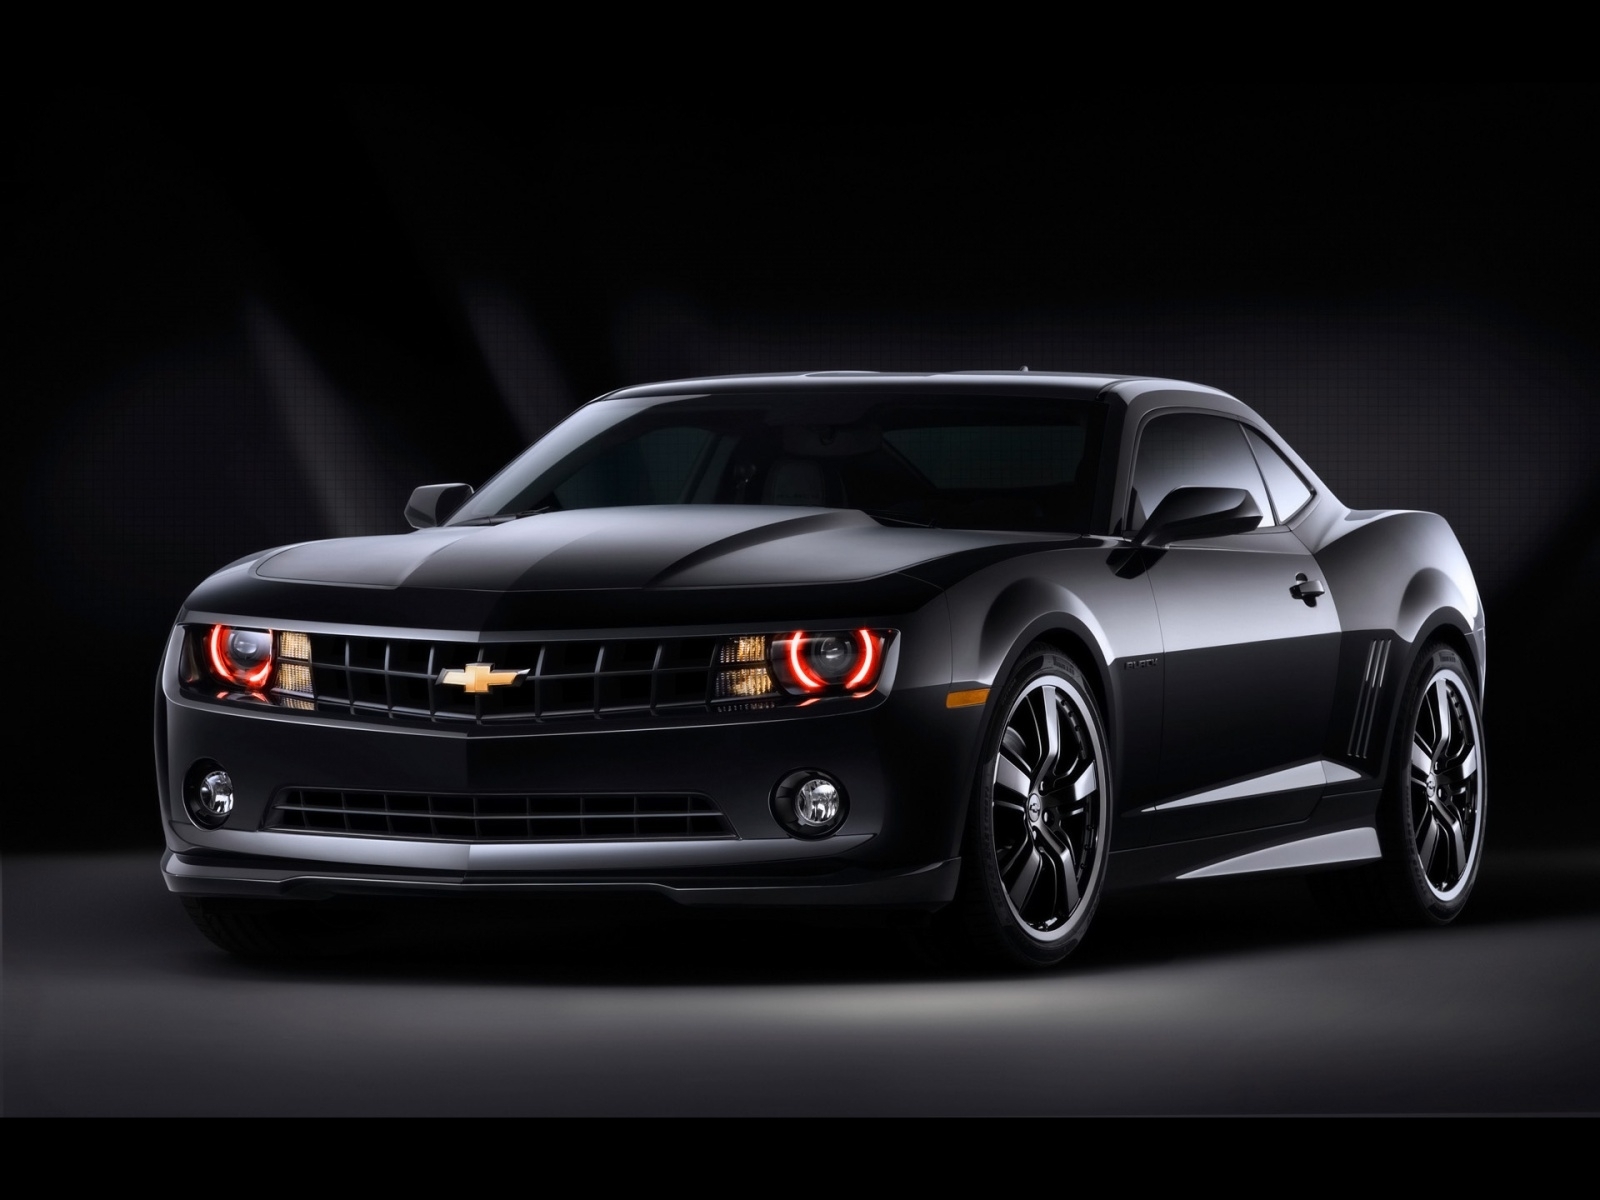 Popular Chevrolet images for mobile phone